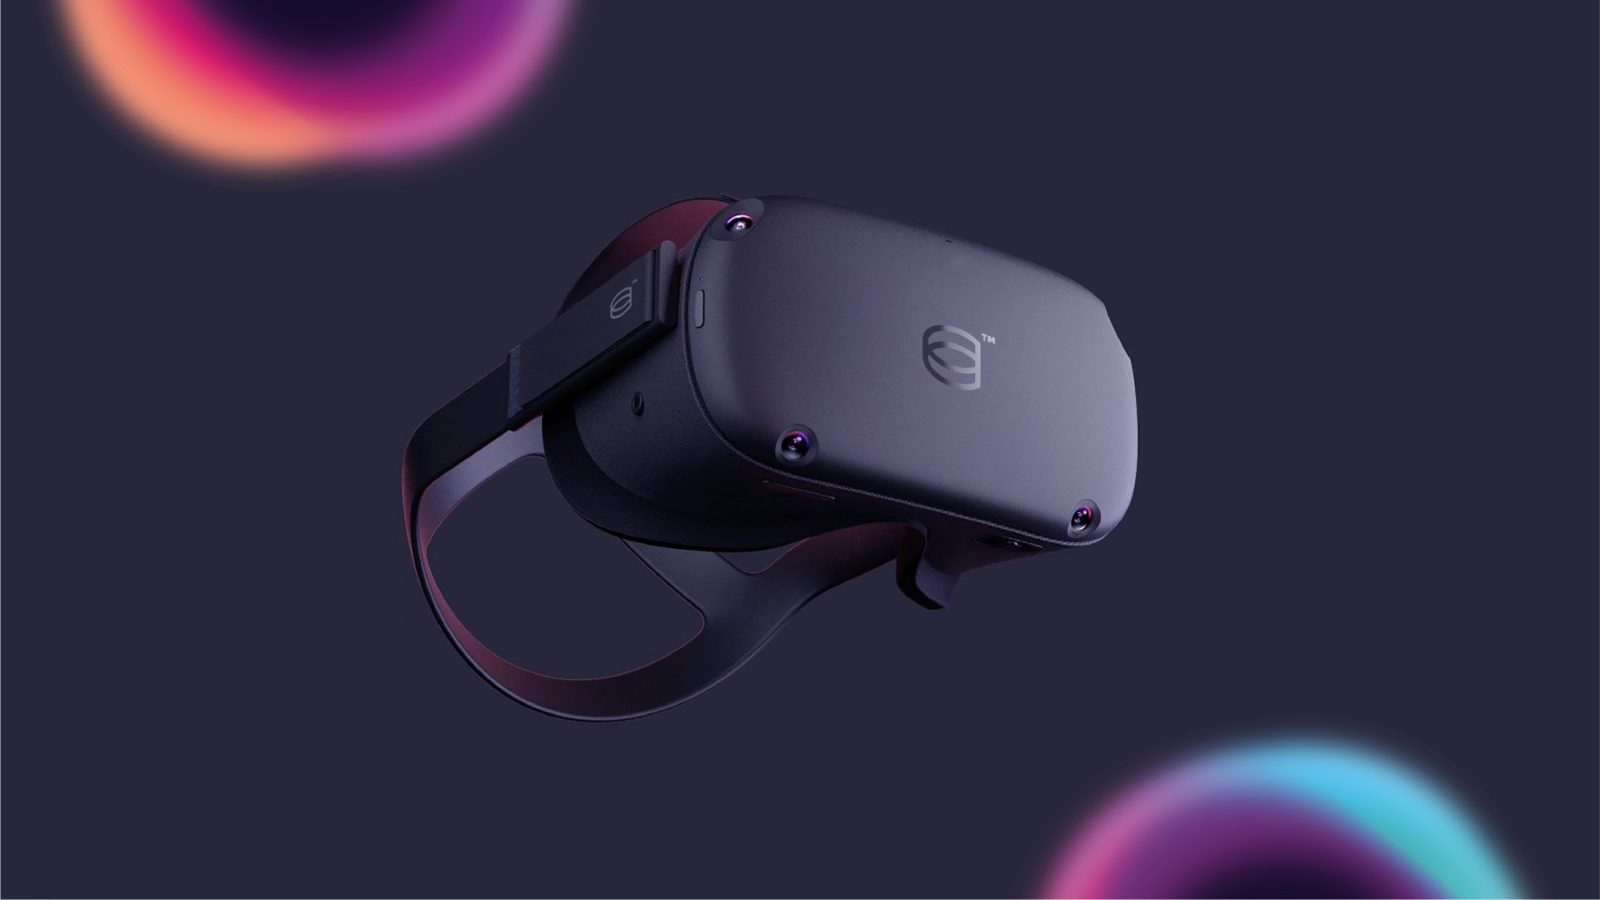 A virtual reality headset, designed by a top Brand Agency UK, floats against a dark background illuminated by colorful, soft-focus light orbs. The headset is sleek, with prominent side buttons and an adjustable strap